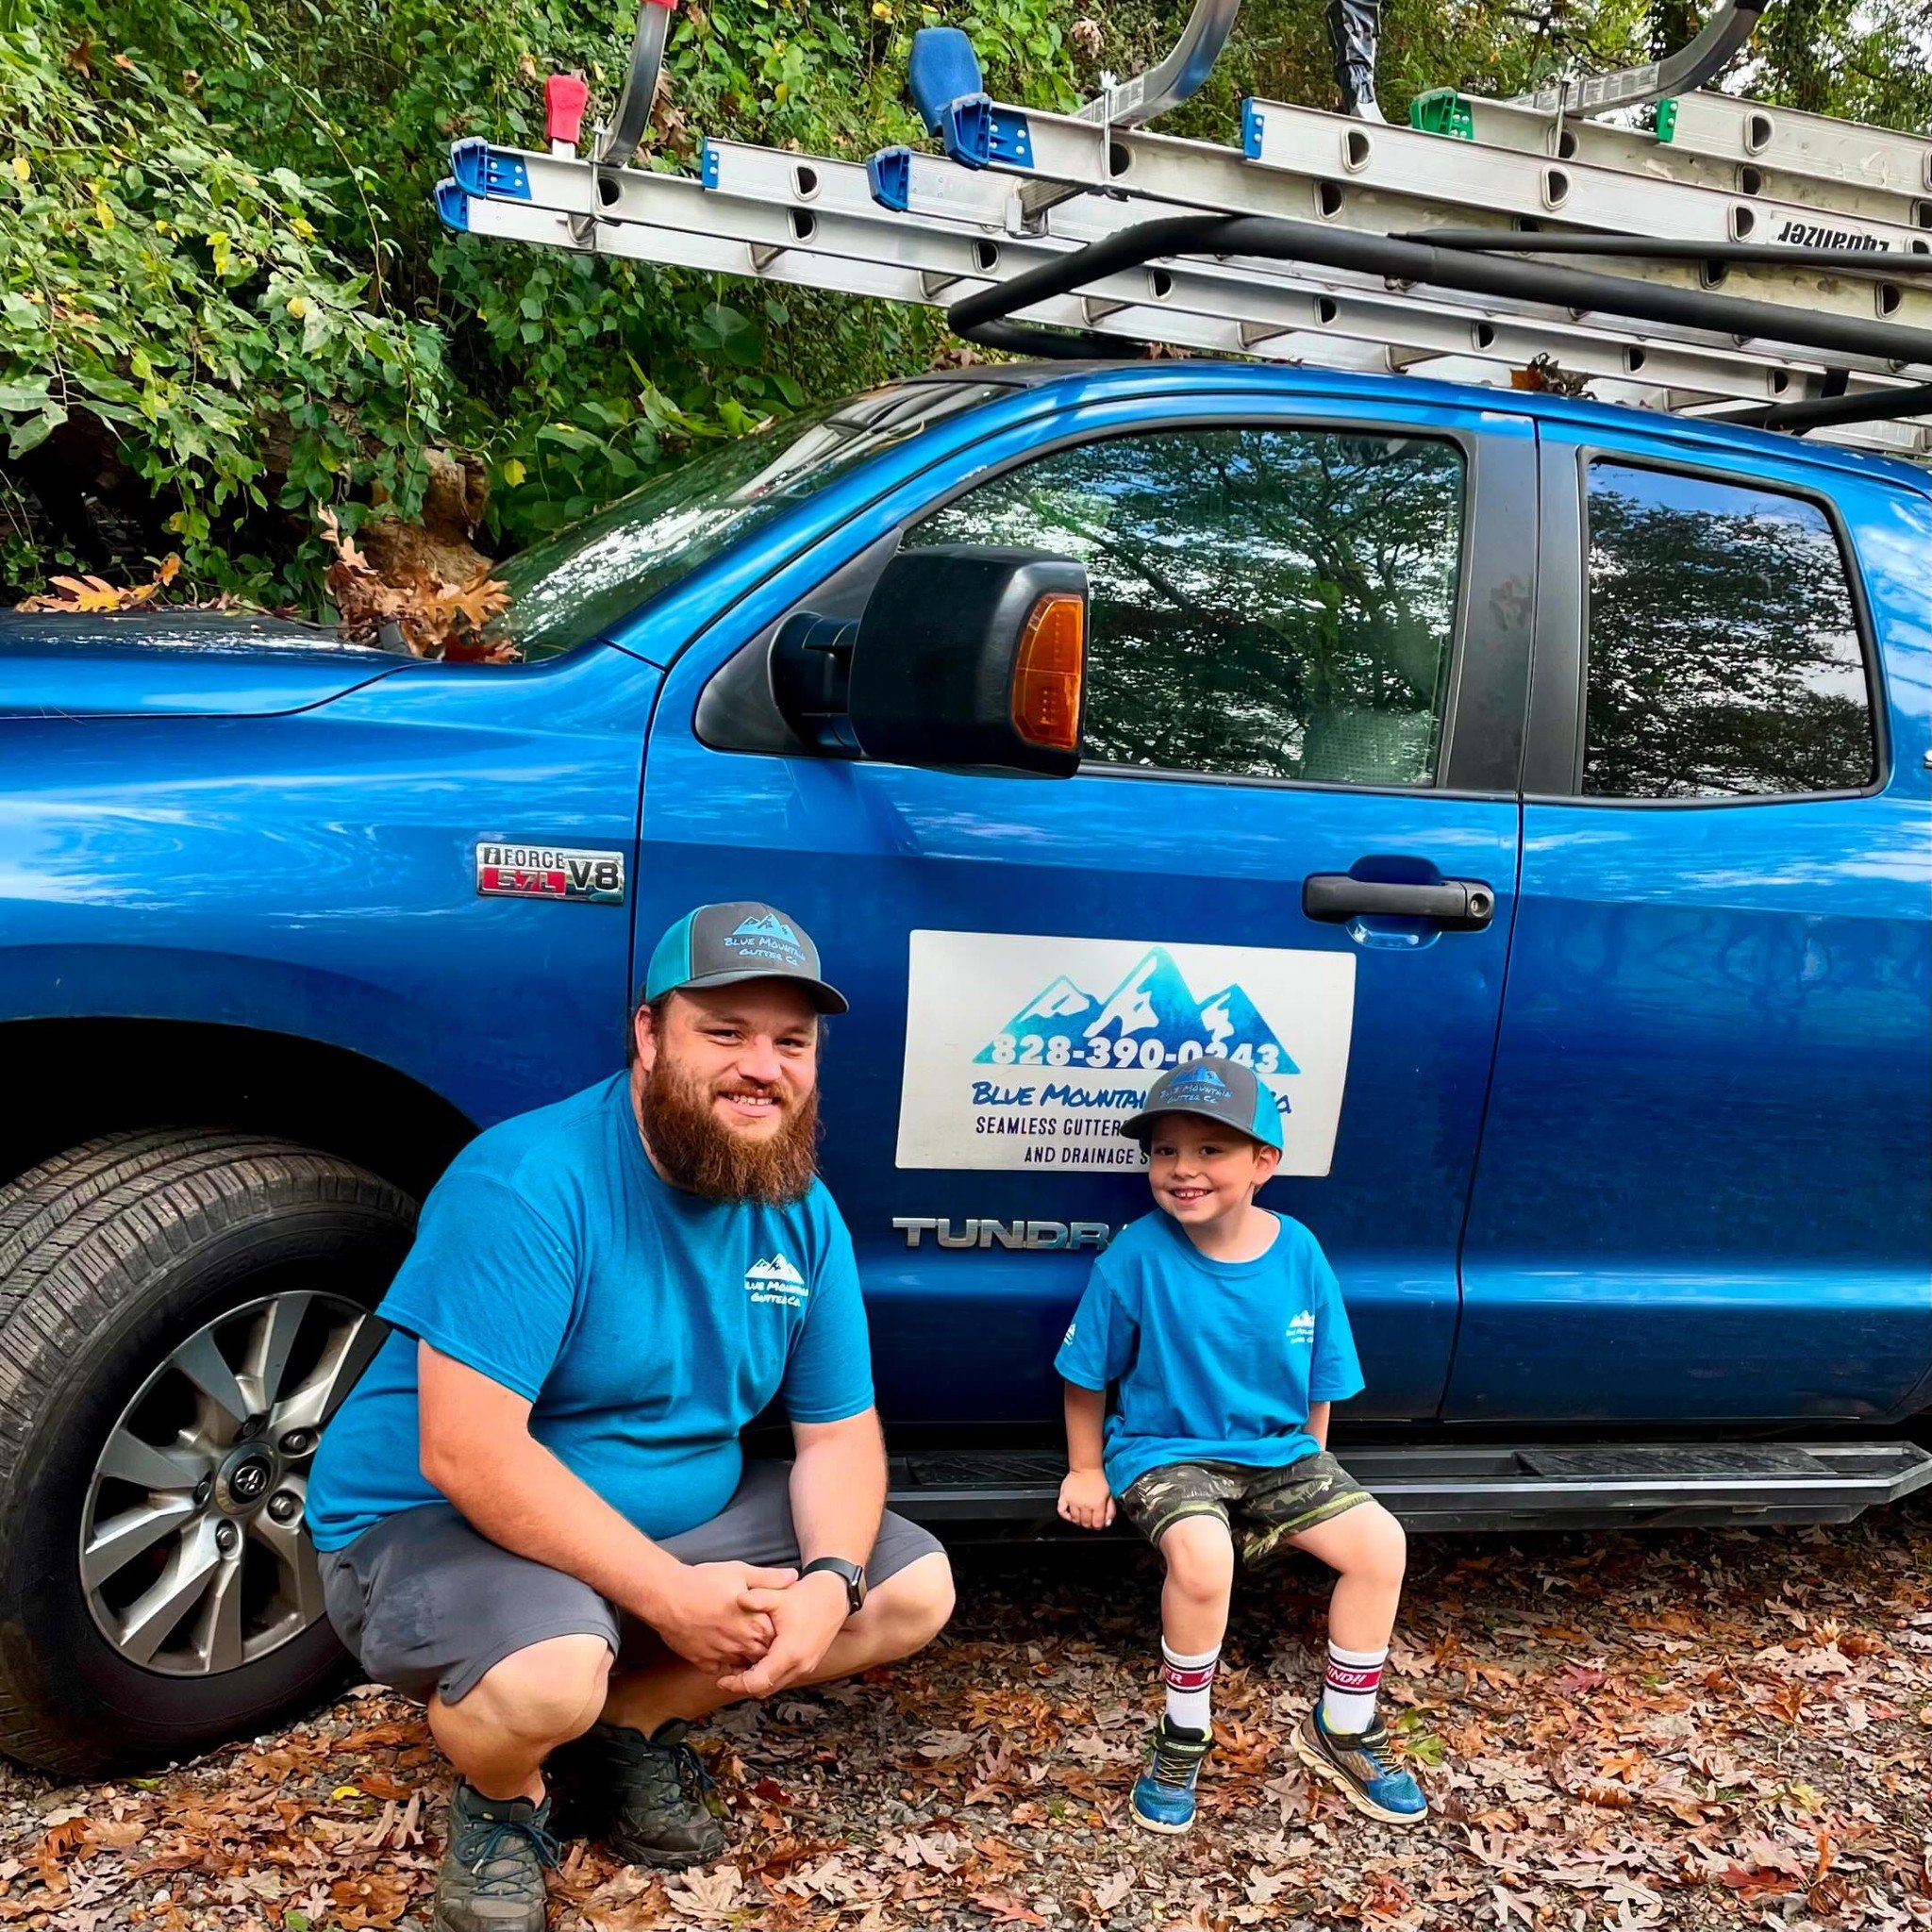 A little #flashbackfriday!  Kids grow up so fast. Don&rsquo;t let the fleeting moments escape.

#fatherson #familygoals #familybusiness #localbusiness #gutters #construction #contractor #timeflies #love #asheville #northcarolina #wnc